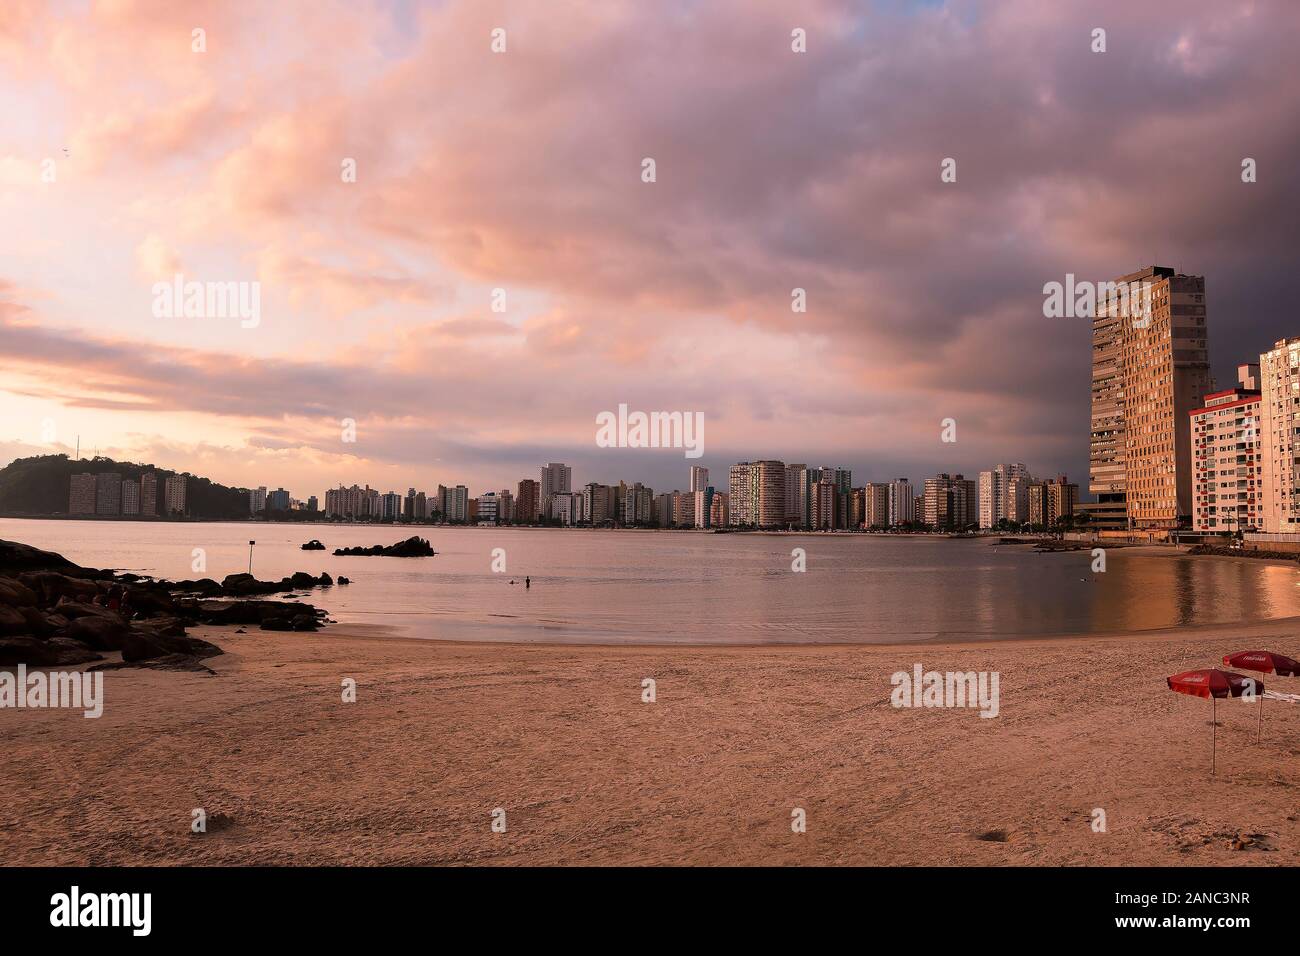 Sao Vicente - SP, Brazil - November 21, 2019: Sunset at Praia dos Milionarios beach, millionaires beach in english and the city on the background. Stock Photo